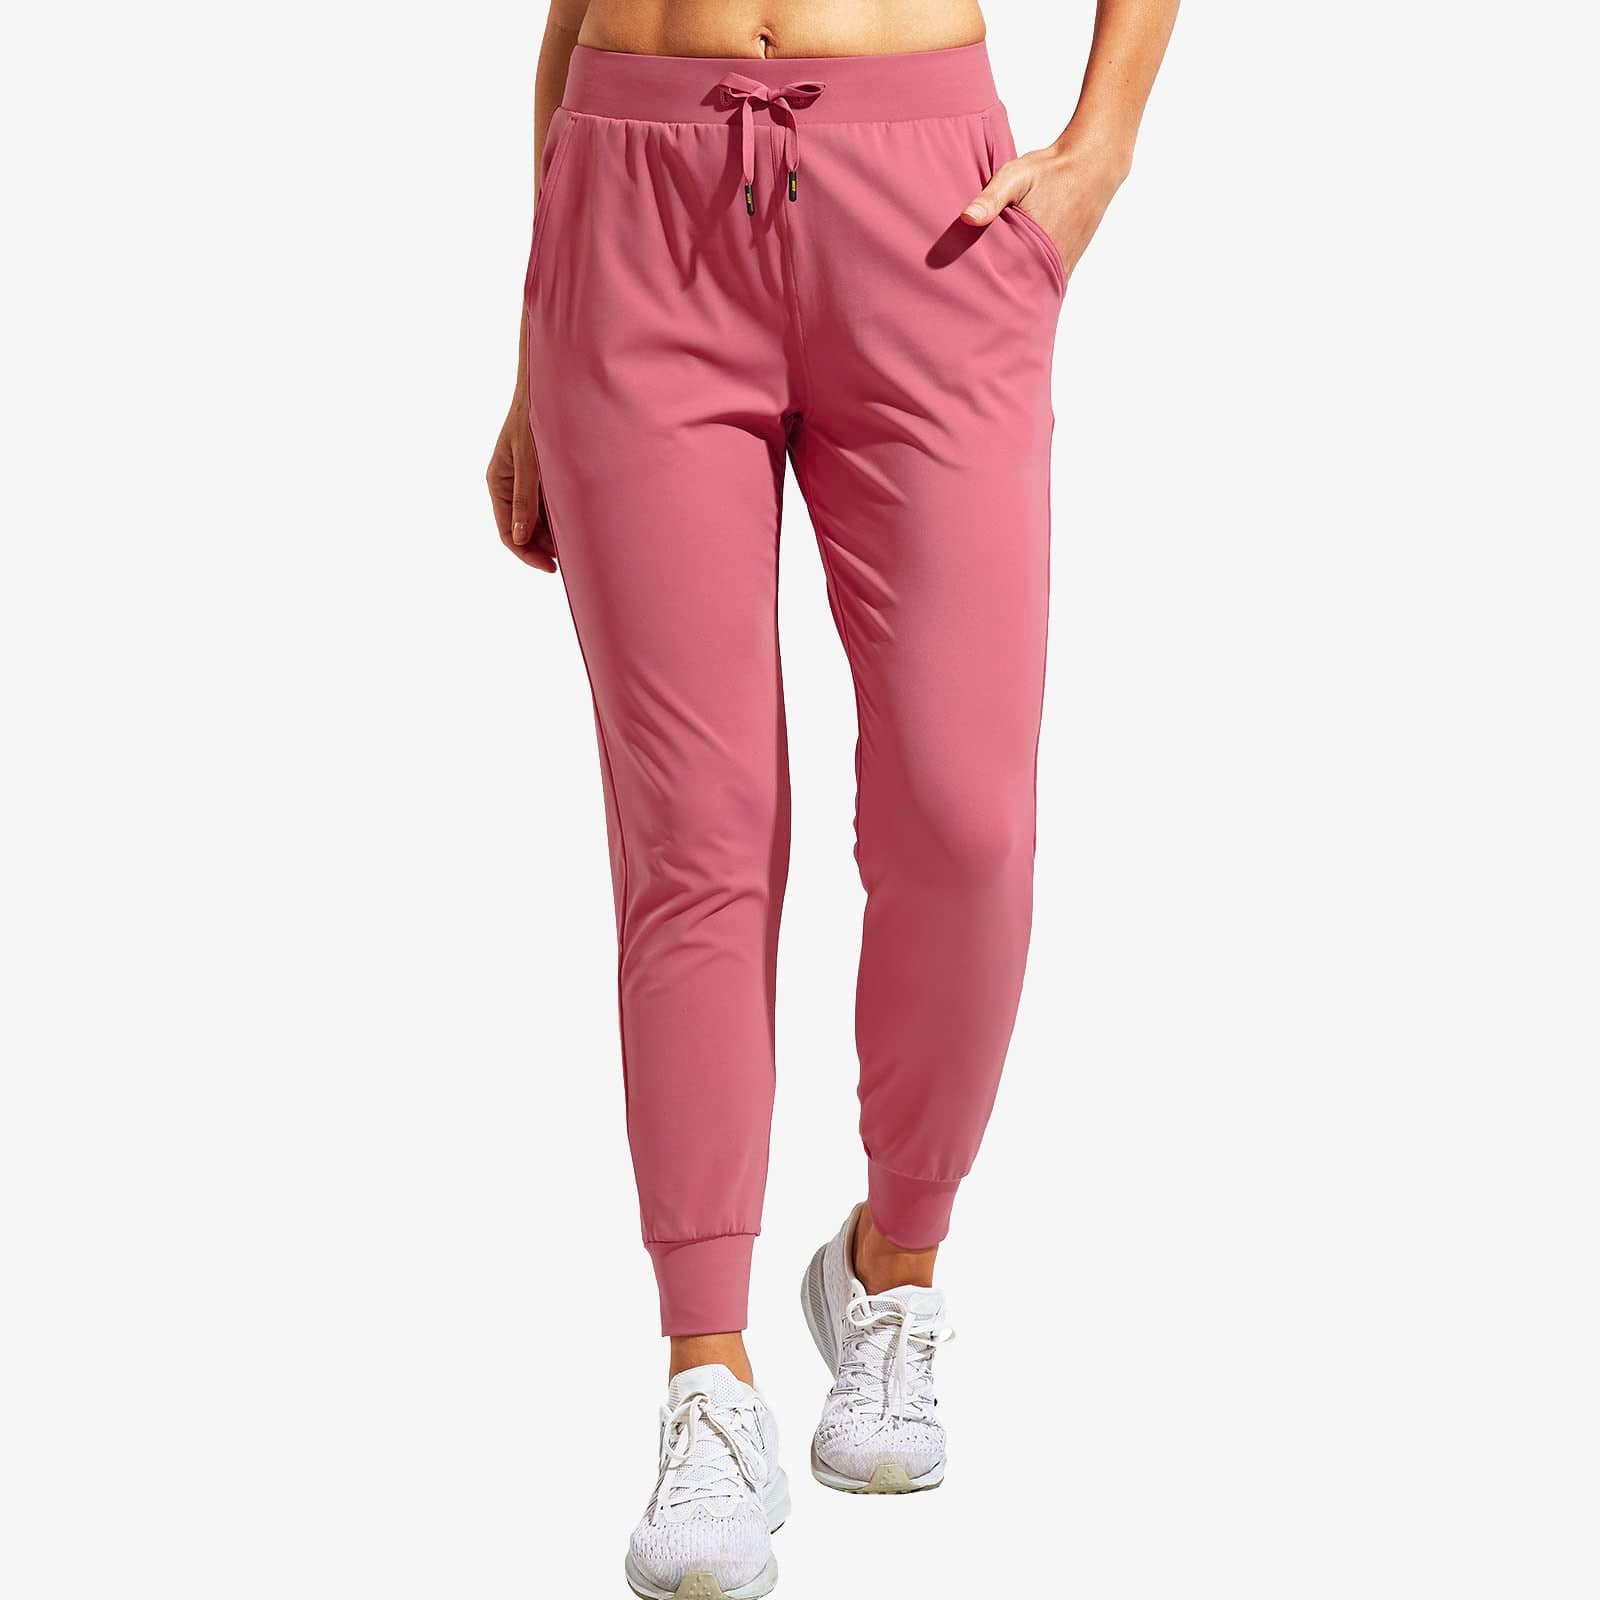 Women Joggers with Pockets Lightweight Athletic Sweatpants Women Active Pants Dusty Red / XS MIER